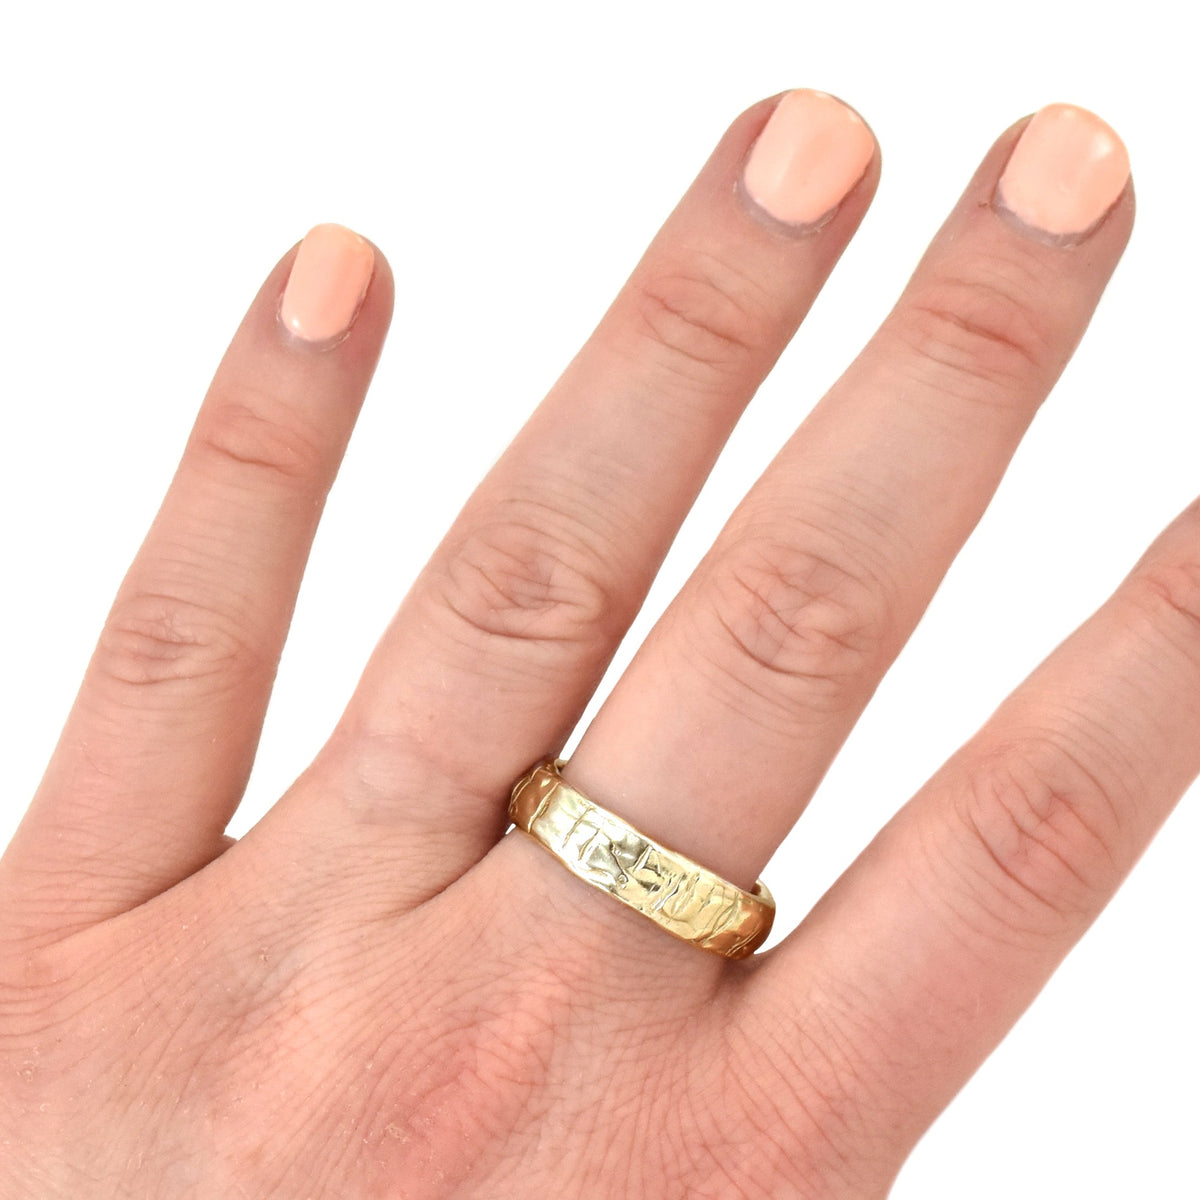 Gold Birch Tree Trunk Ring - your choice of gold - Wedding Ring 14K Yellow Gold 18K Palladium White Gold 6364 - handmade by Beth Millner Jewelry